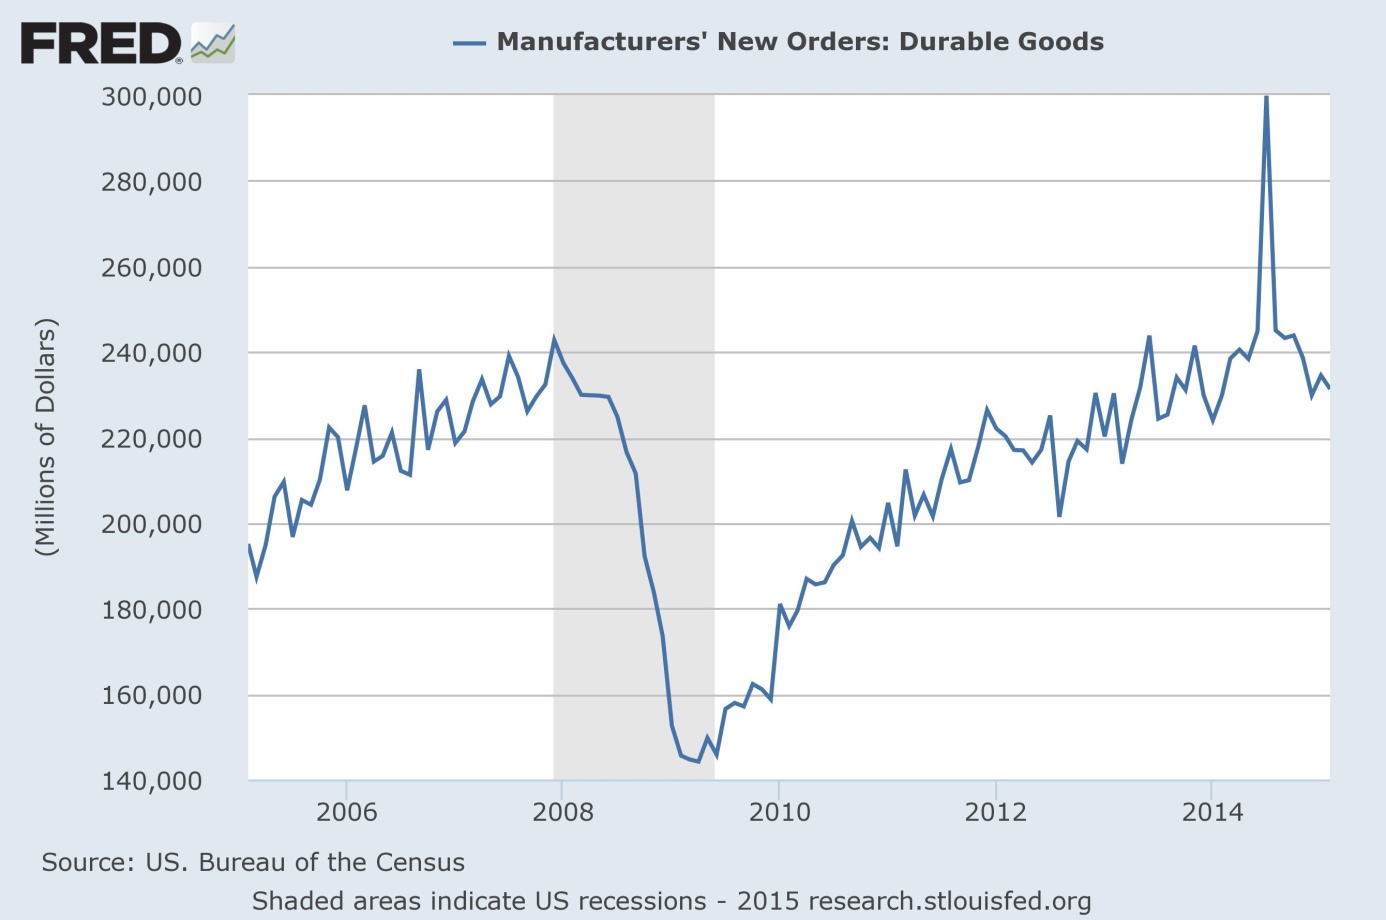 New orders for durable goods from 2005 to 2015